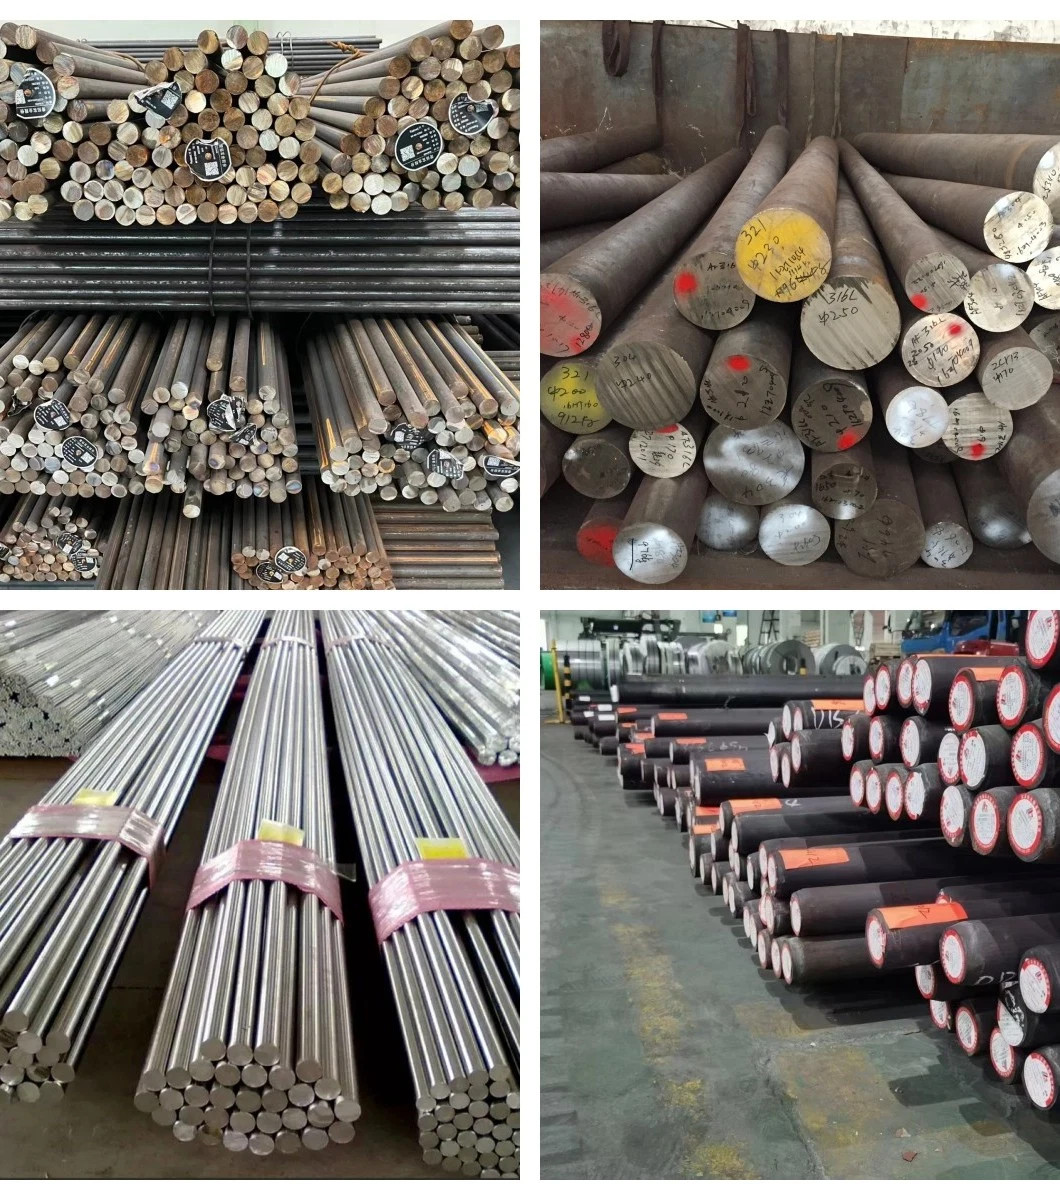 ASTM SUS 5mm, 6mm, 10mm, 12mm Metal Rod Polish 304 Stainless Steel Round Bar Price List